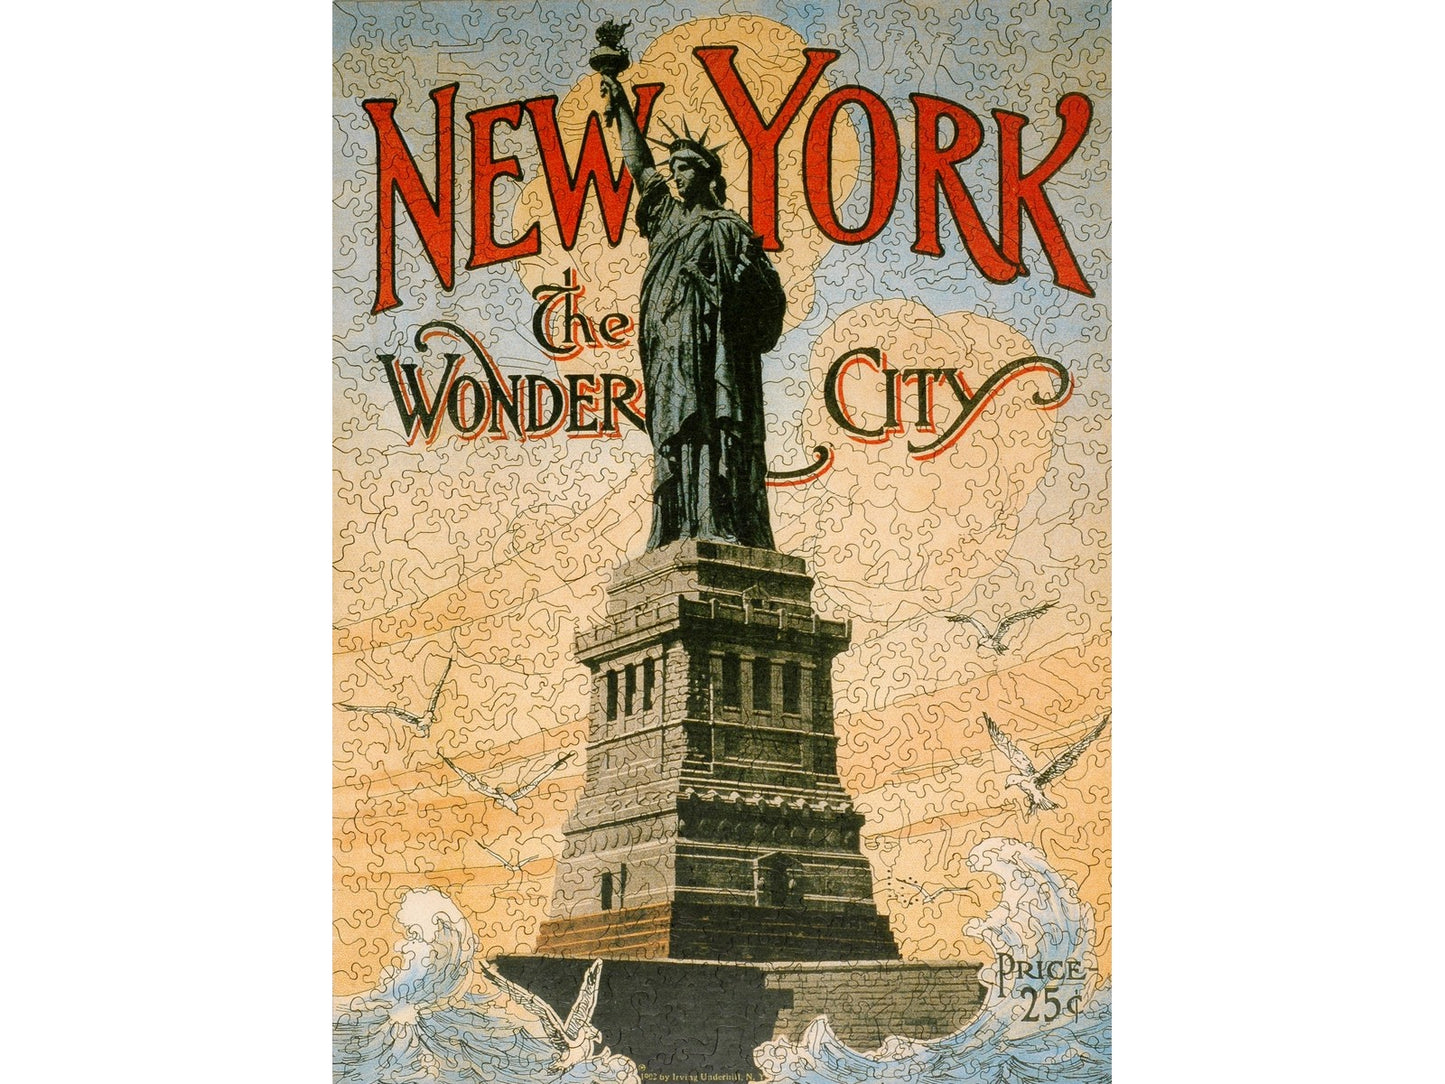 The front of the puzzle, New York the Wonder City, which shows the statue of liberty.